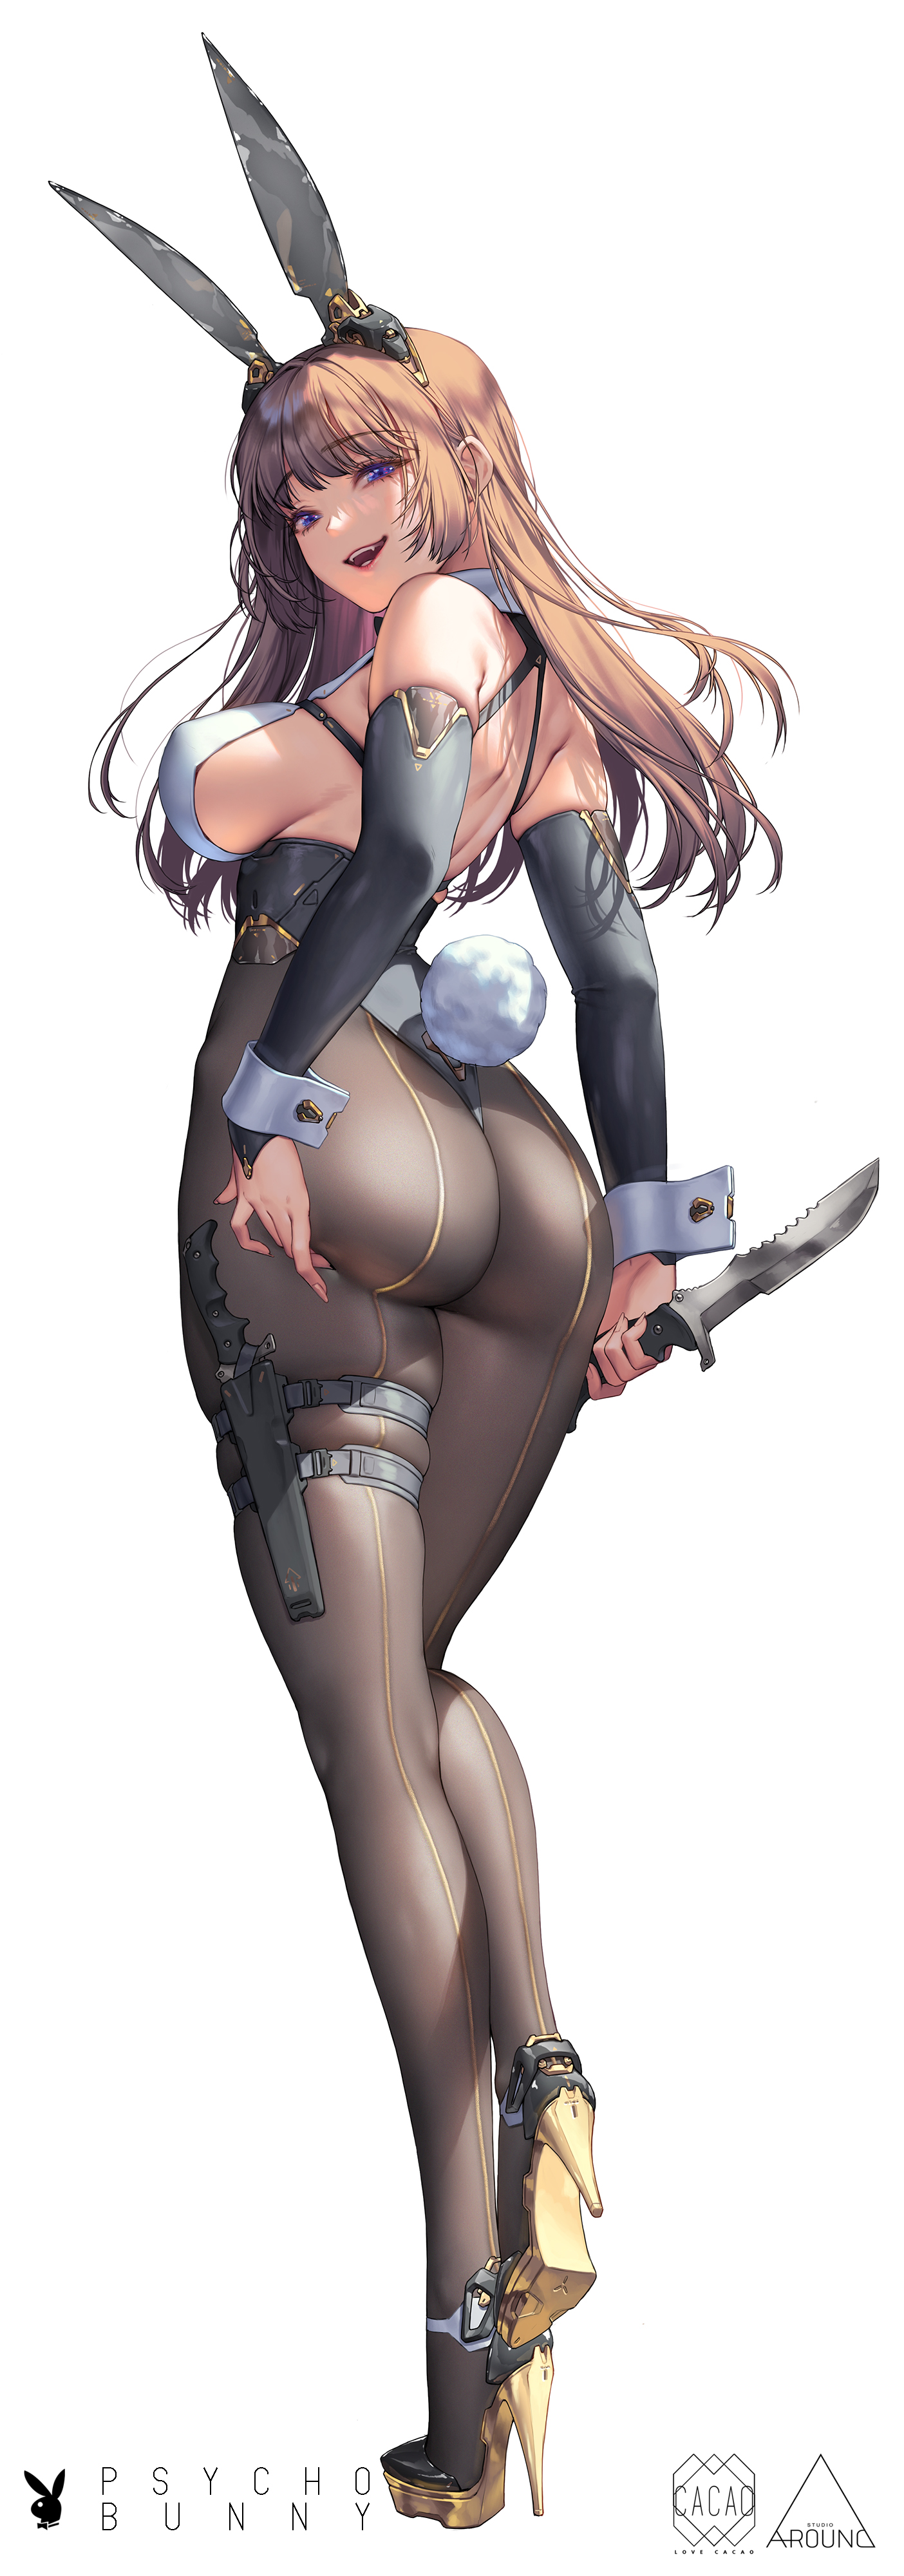 Anime 1404x4000 anime girls boobs bunny girl Lovecacao animal ears bunny suit knife Psycho Bunny portrait display bunny ears ass sideboob brunette blue eyes white background heels booty scoop bodysuit plugsuit thick ass high heels